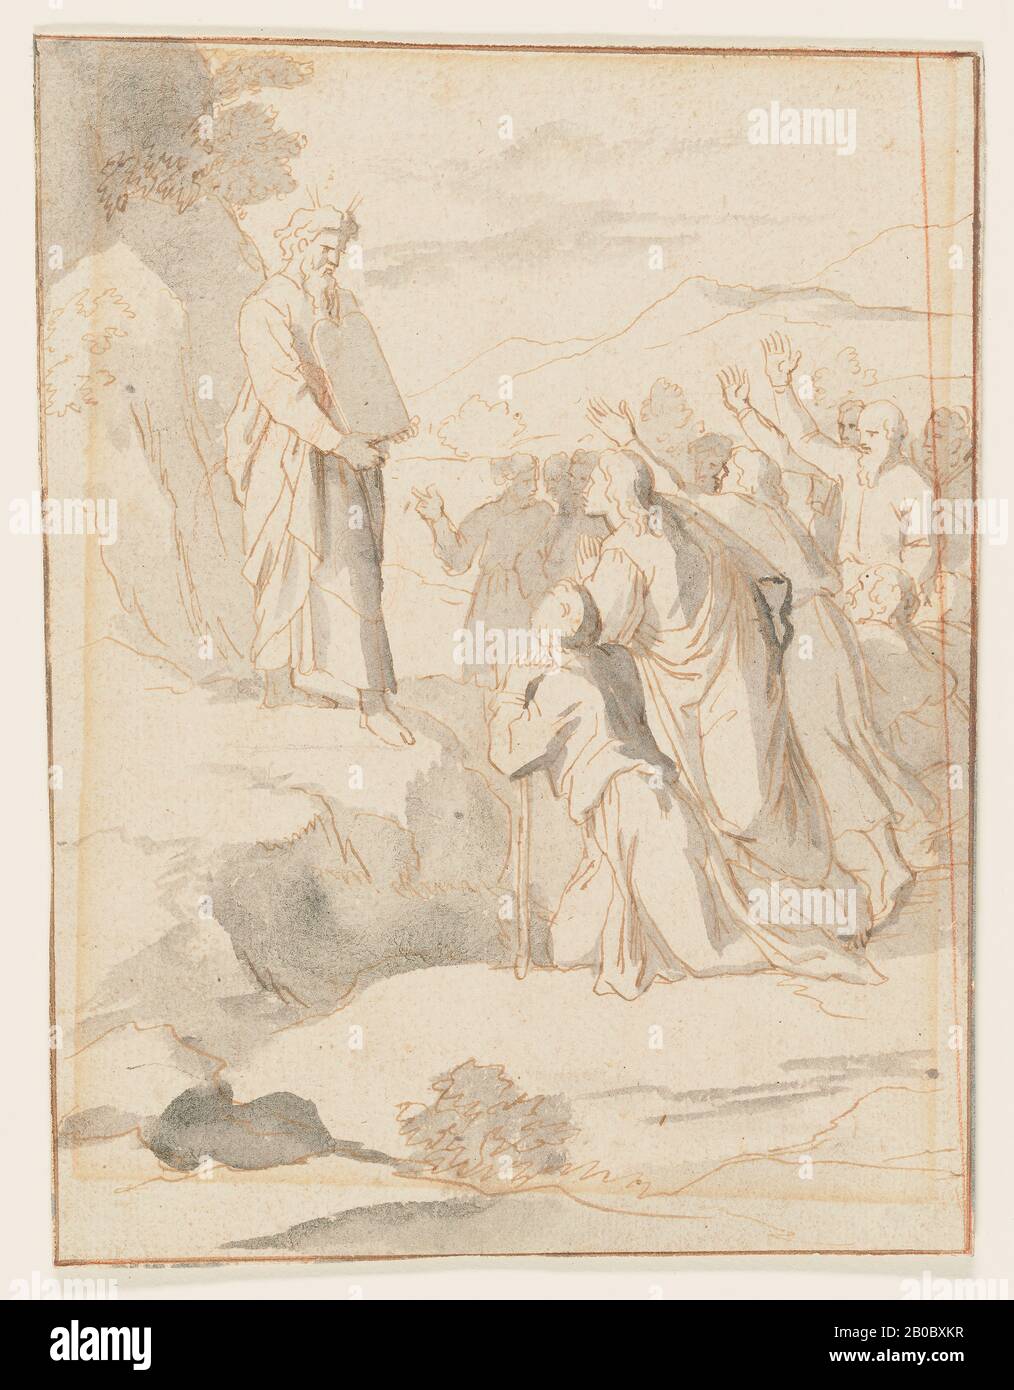 copy after Raphael, Moses and the Tablets, 1500-1600, pen and brown ink, grey wash, touches of red chalk on paper, 8 1/8 in. x 6 1/4 in. (20.7 cm. x 15.9 cm.) Stock Photo